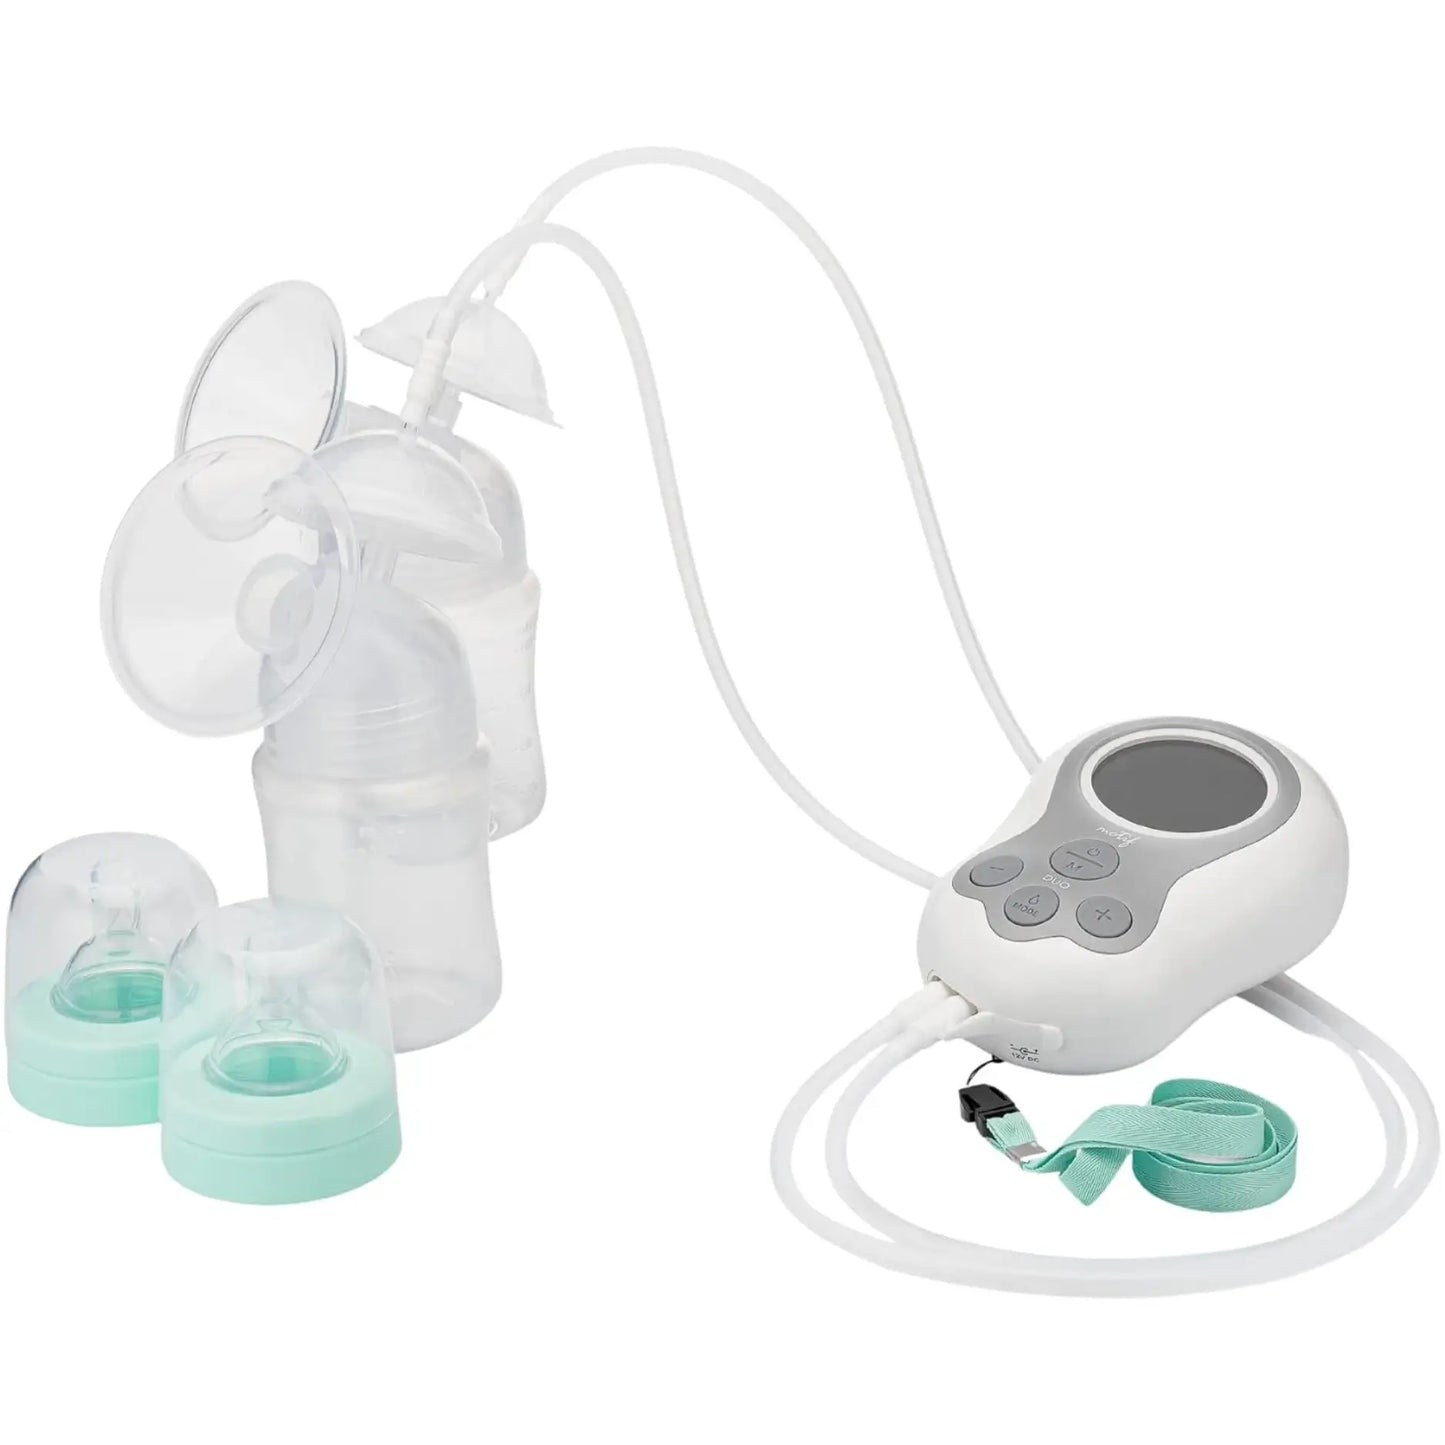 Motif Duo Double Electric Breast Pump, lightweight and portable, perfect for hands-free pumping on the go.